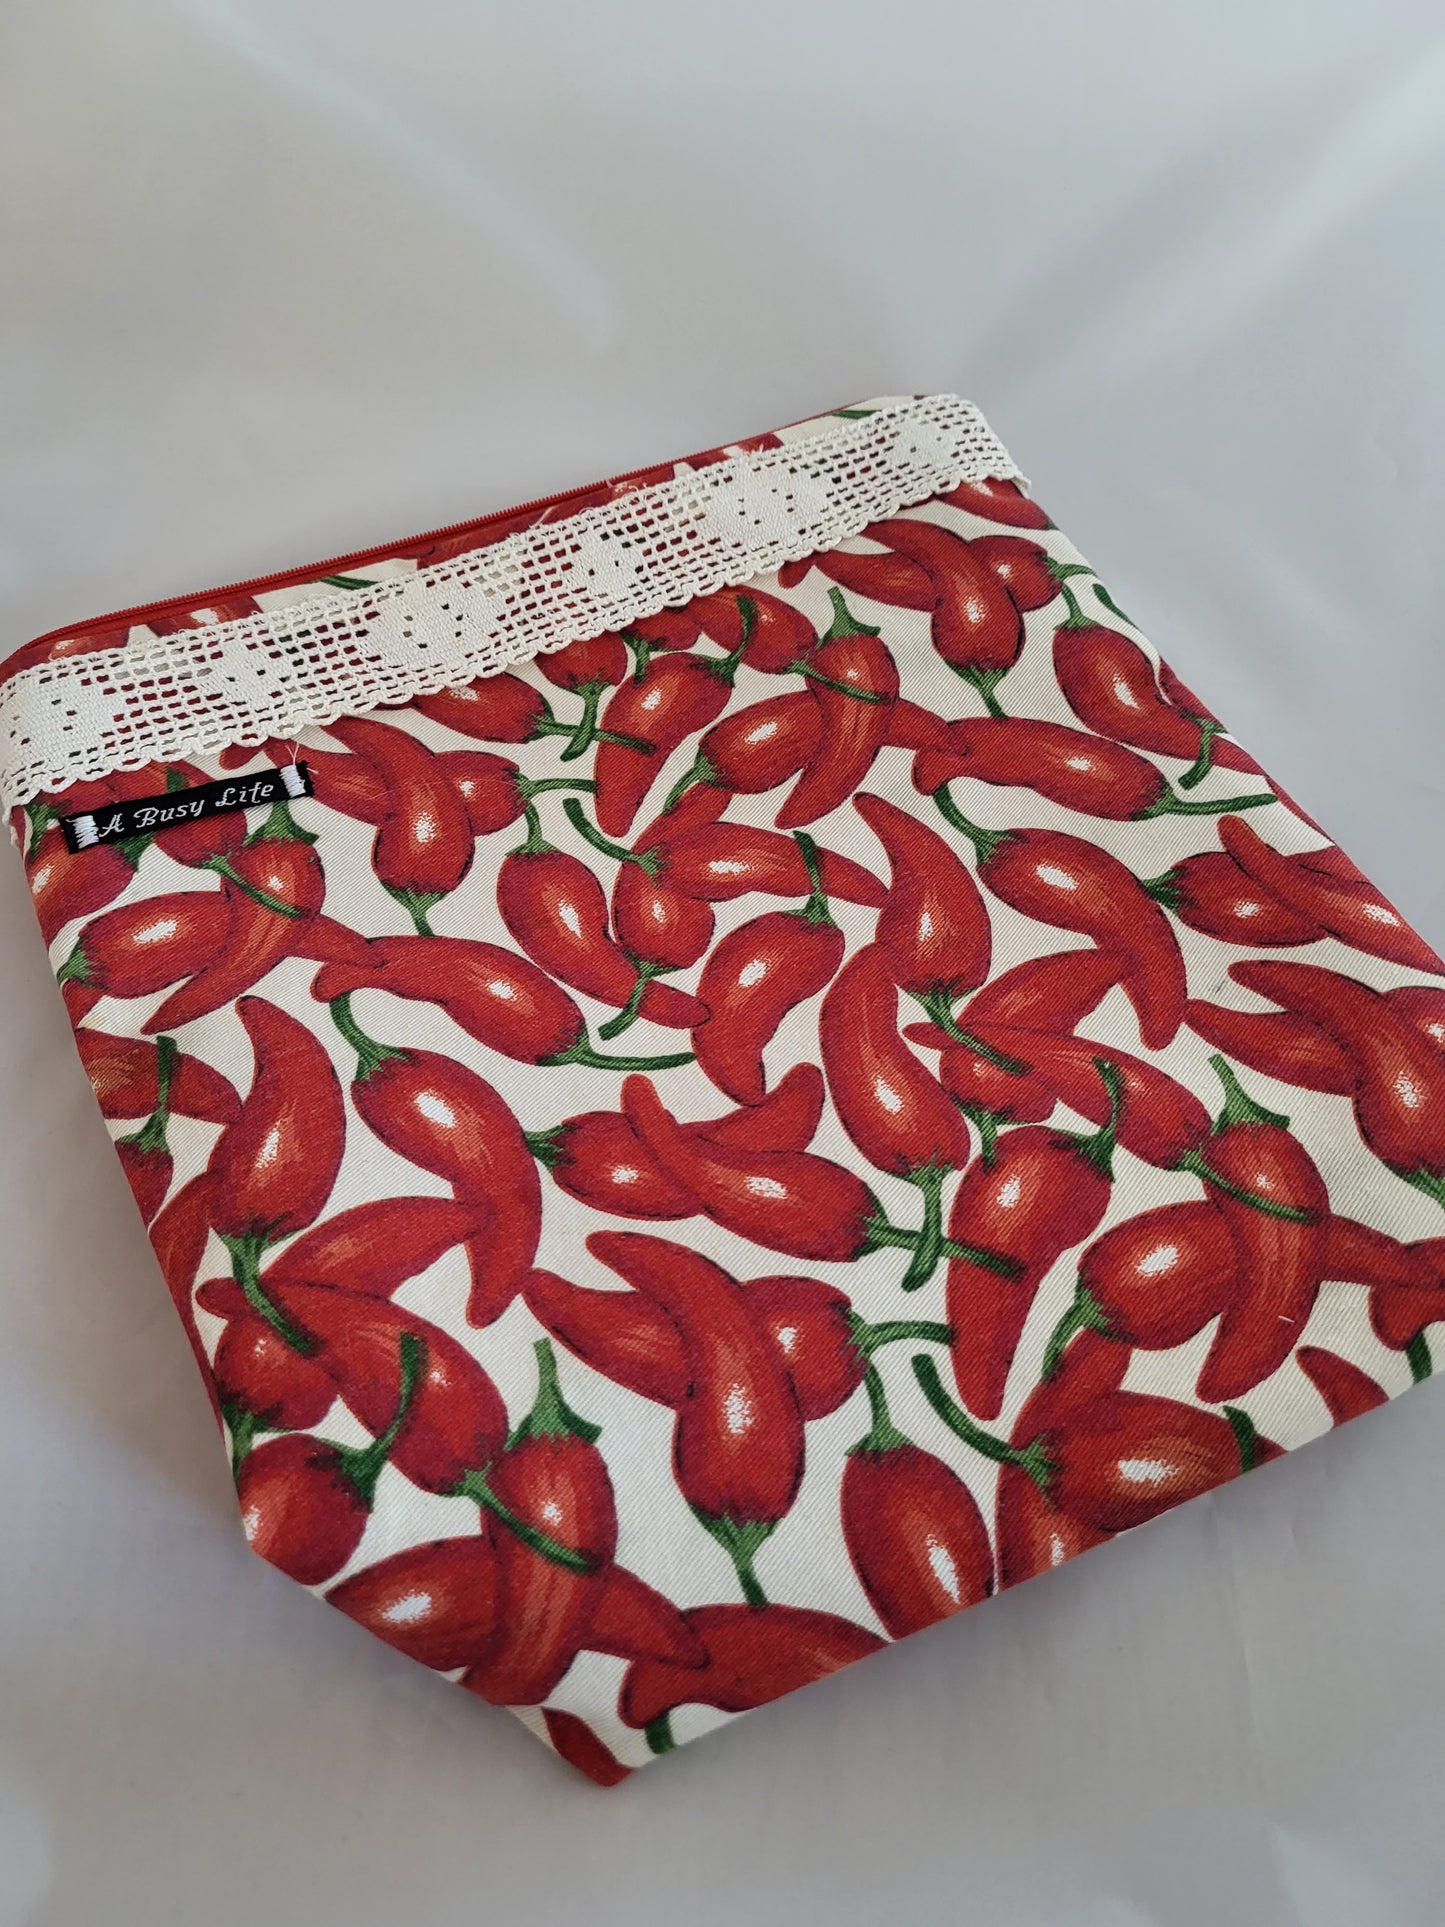 Hot Pepper and Lace Project Bag, Zippered Project Bag, Hot Pepper project bag,  project bag,  Storage bag